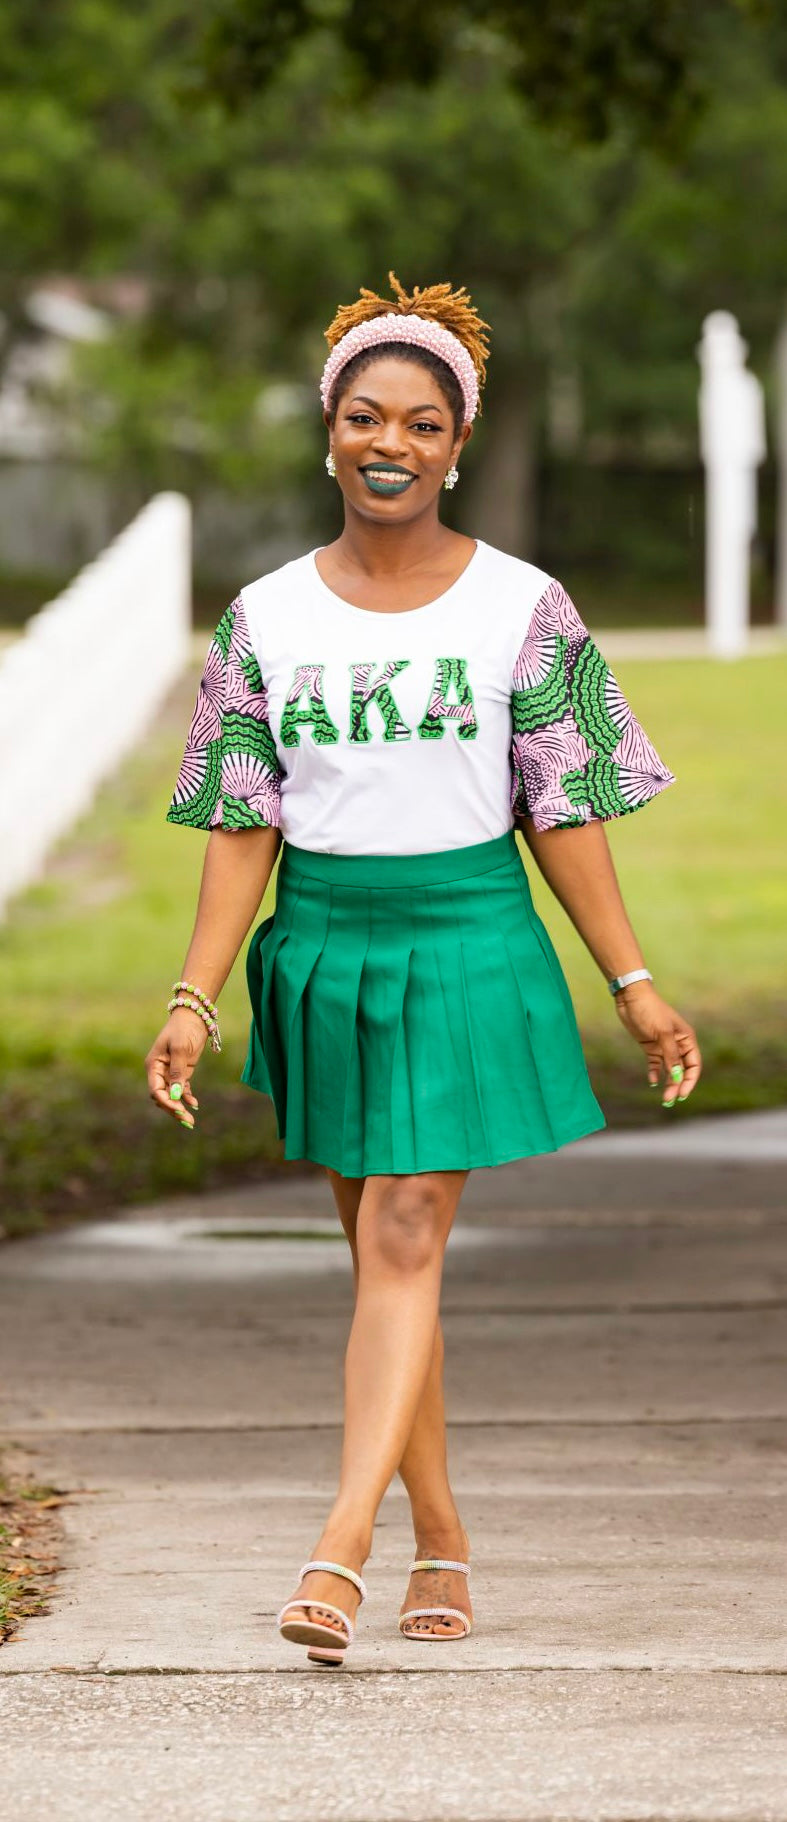 Alpha Kappa Alpha Sleeve Top- size UP recommended